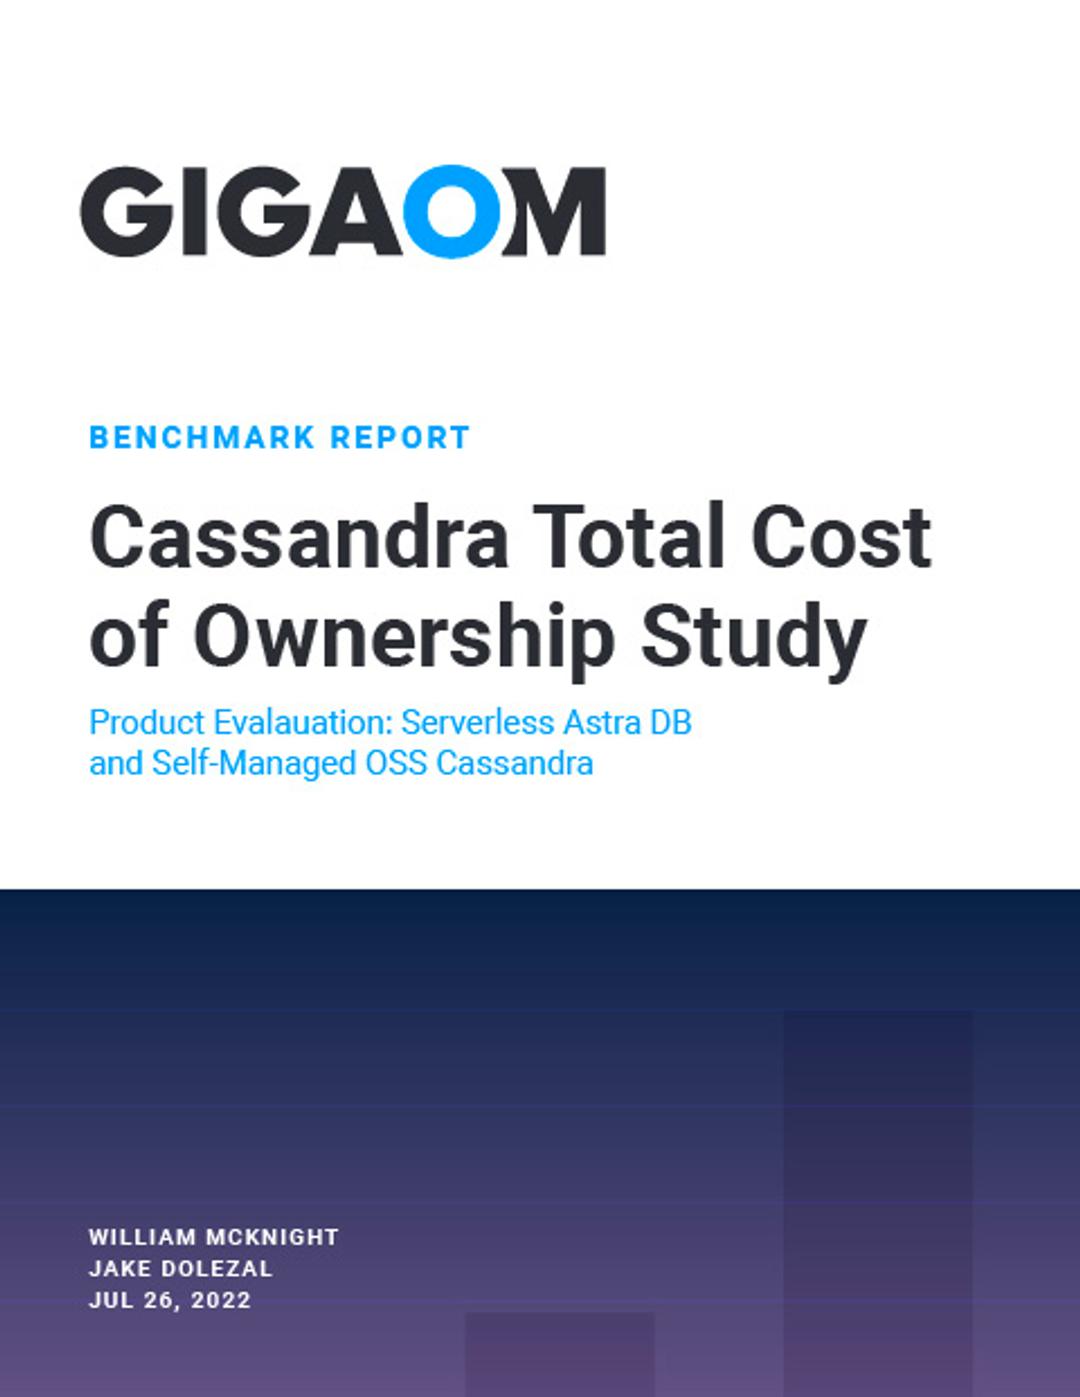 Cassandra Total Cost of Ownership Study